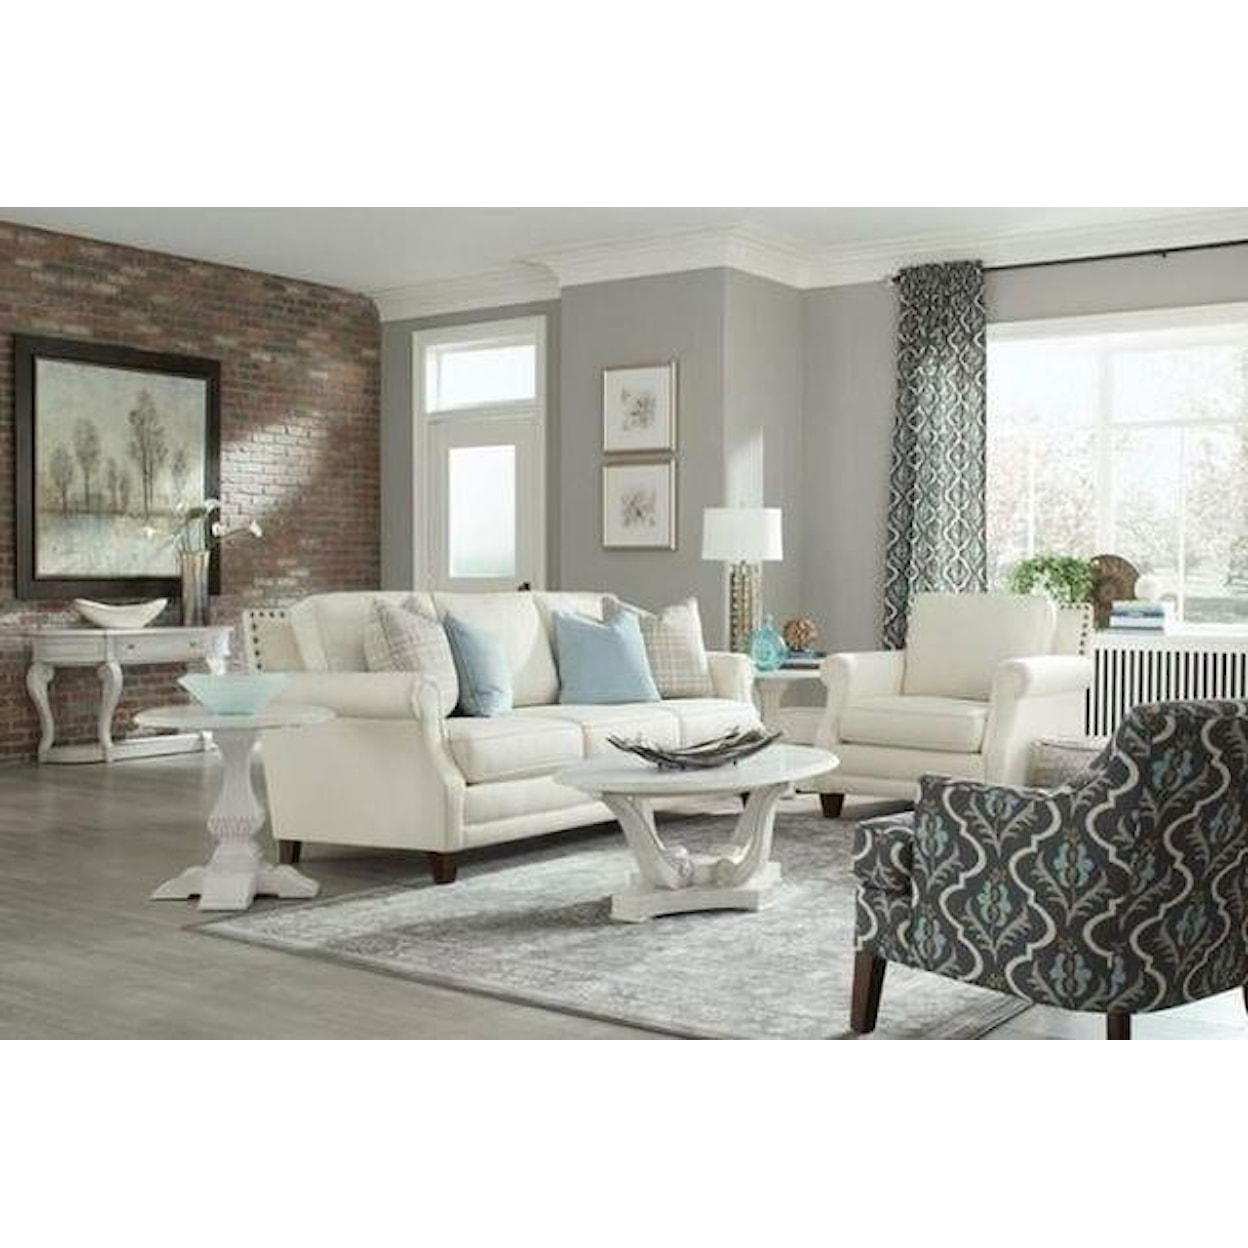 Trisha Yearwood Home Collection by Legacy Classic Jasper County Ottoman